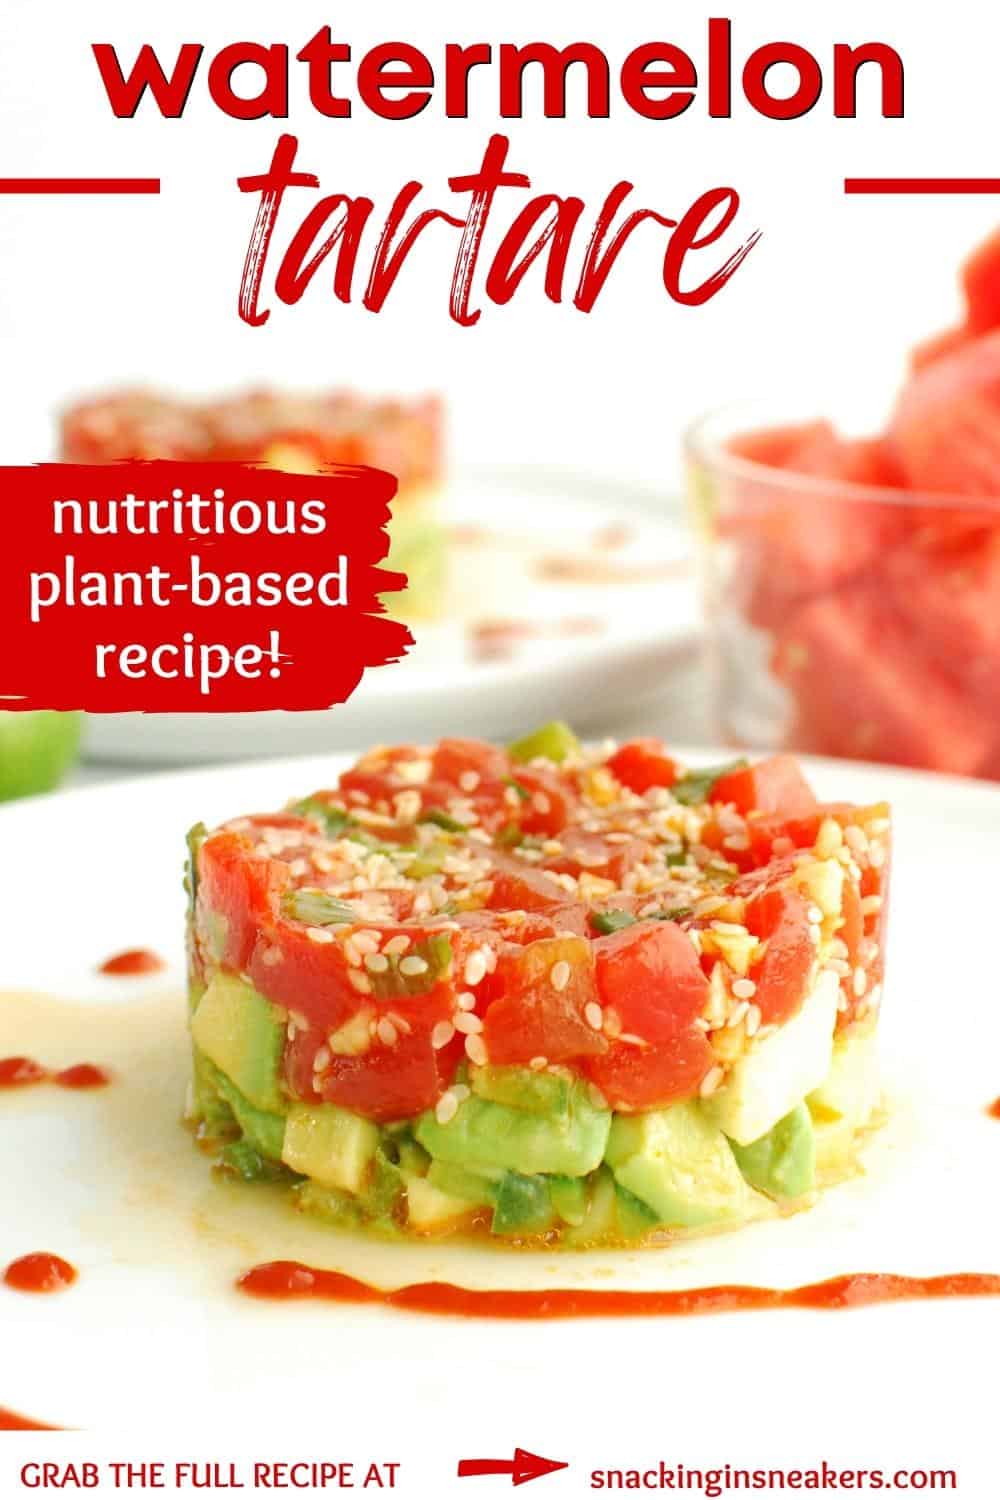 Watermelon tartare on a plate with a text overlay with the recipe name.